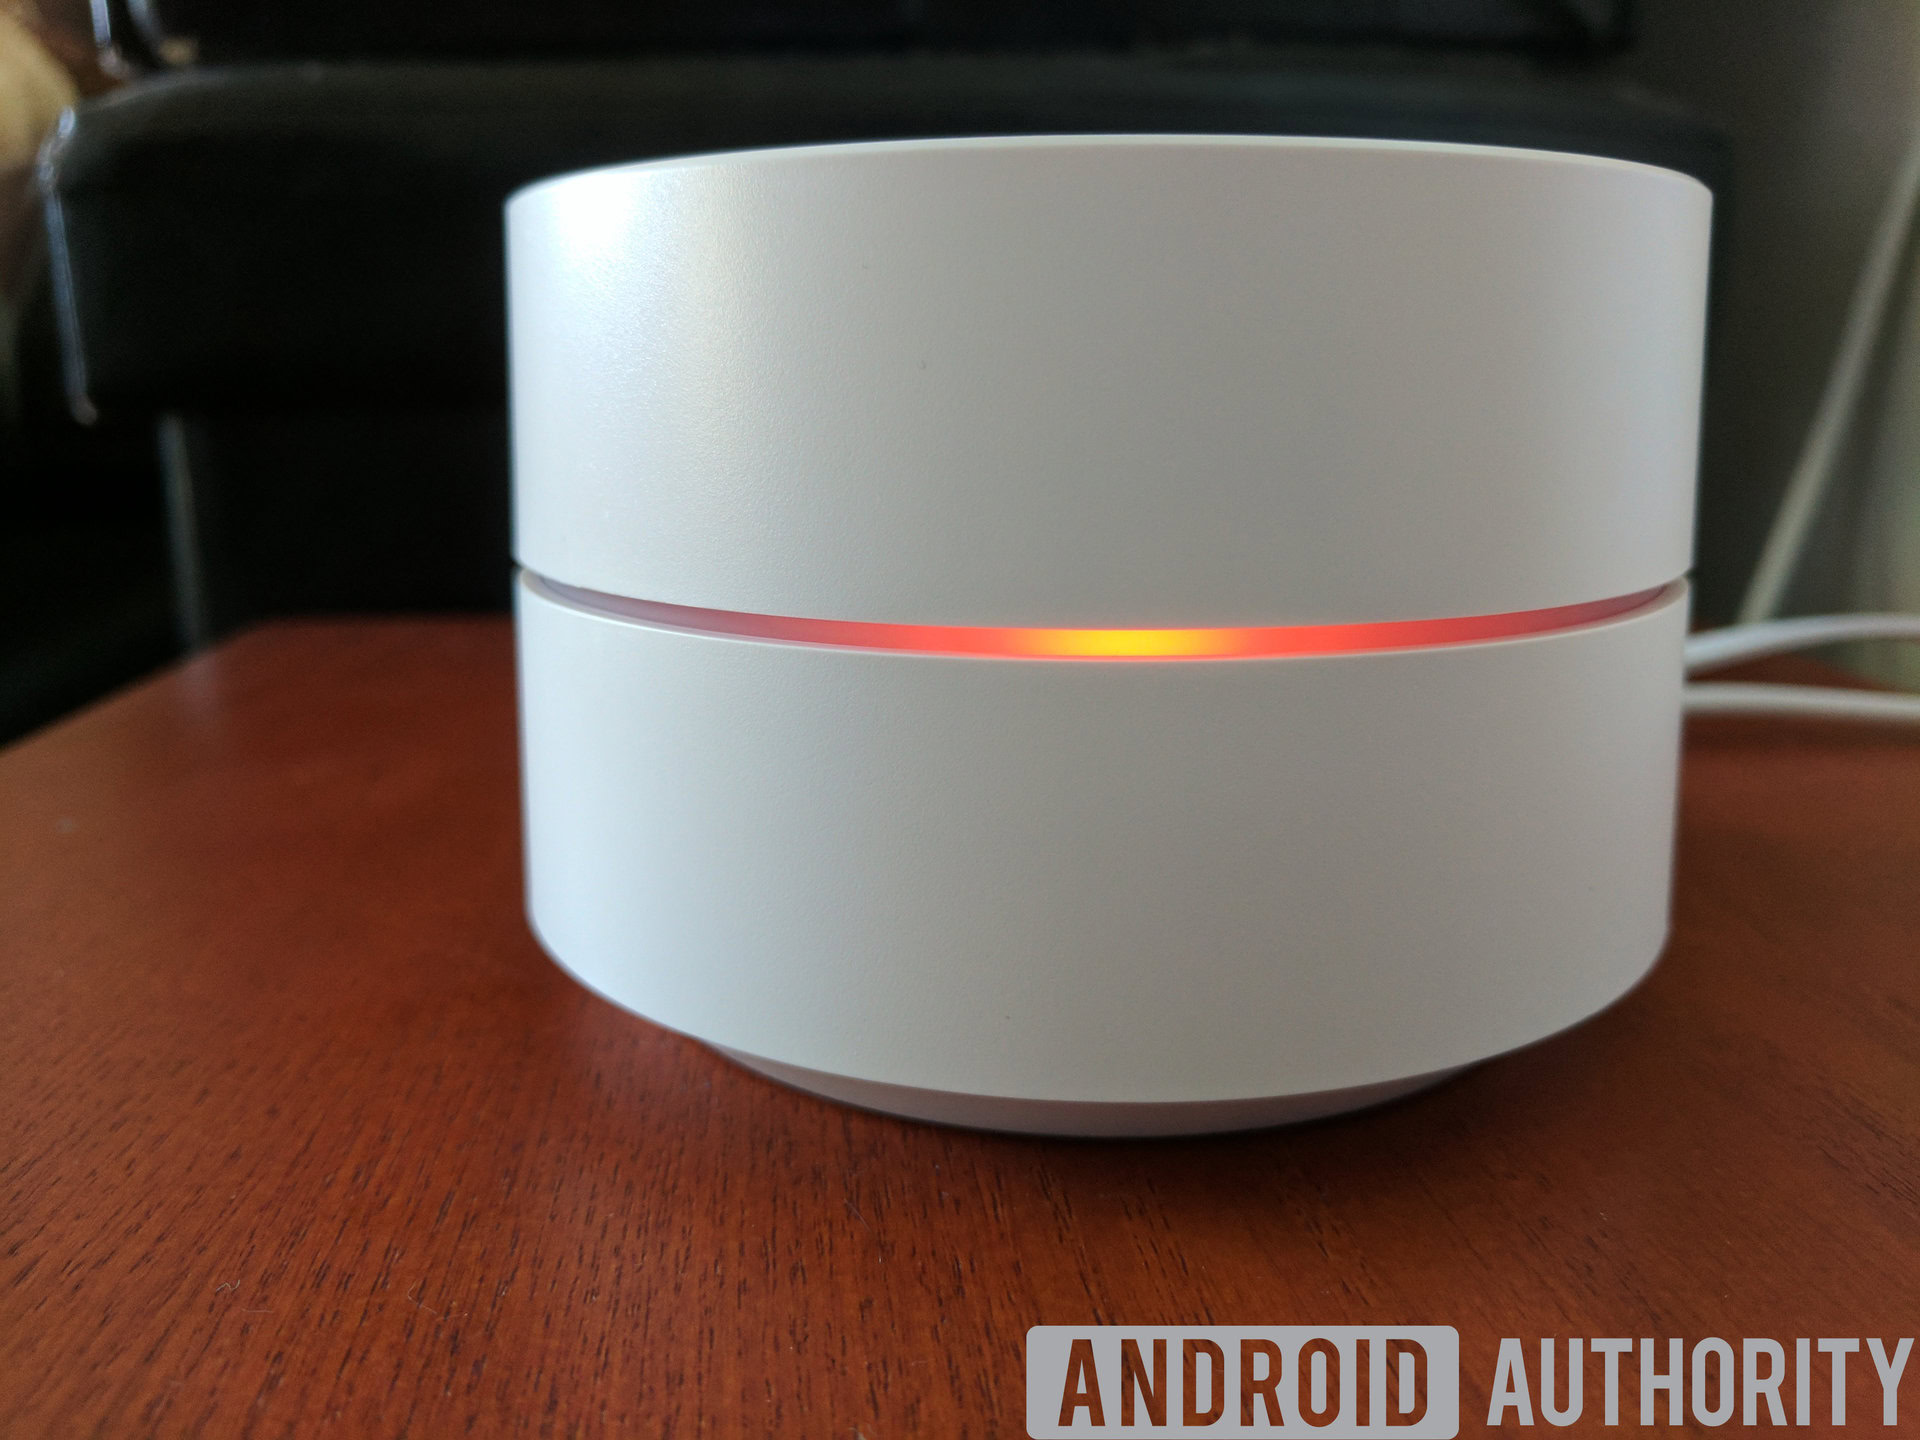 Latest Google Wifi update causing issues, Google working on a fix